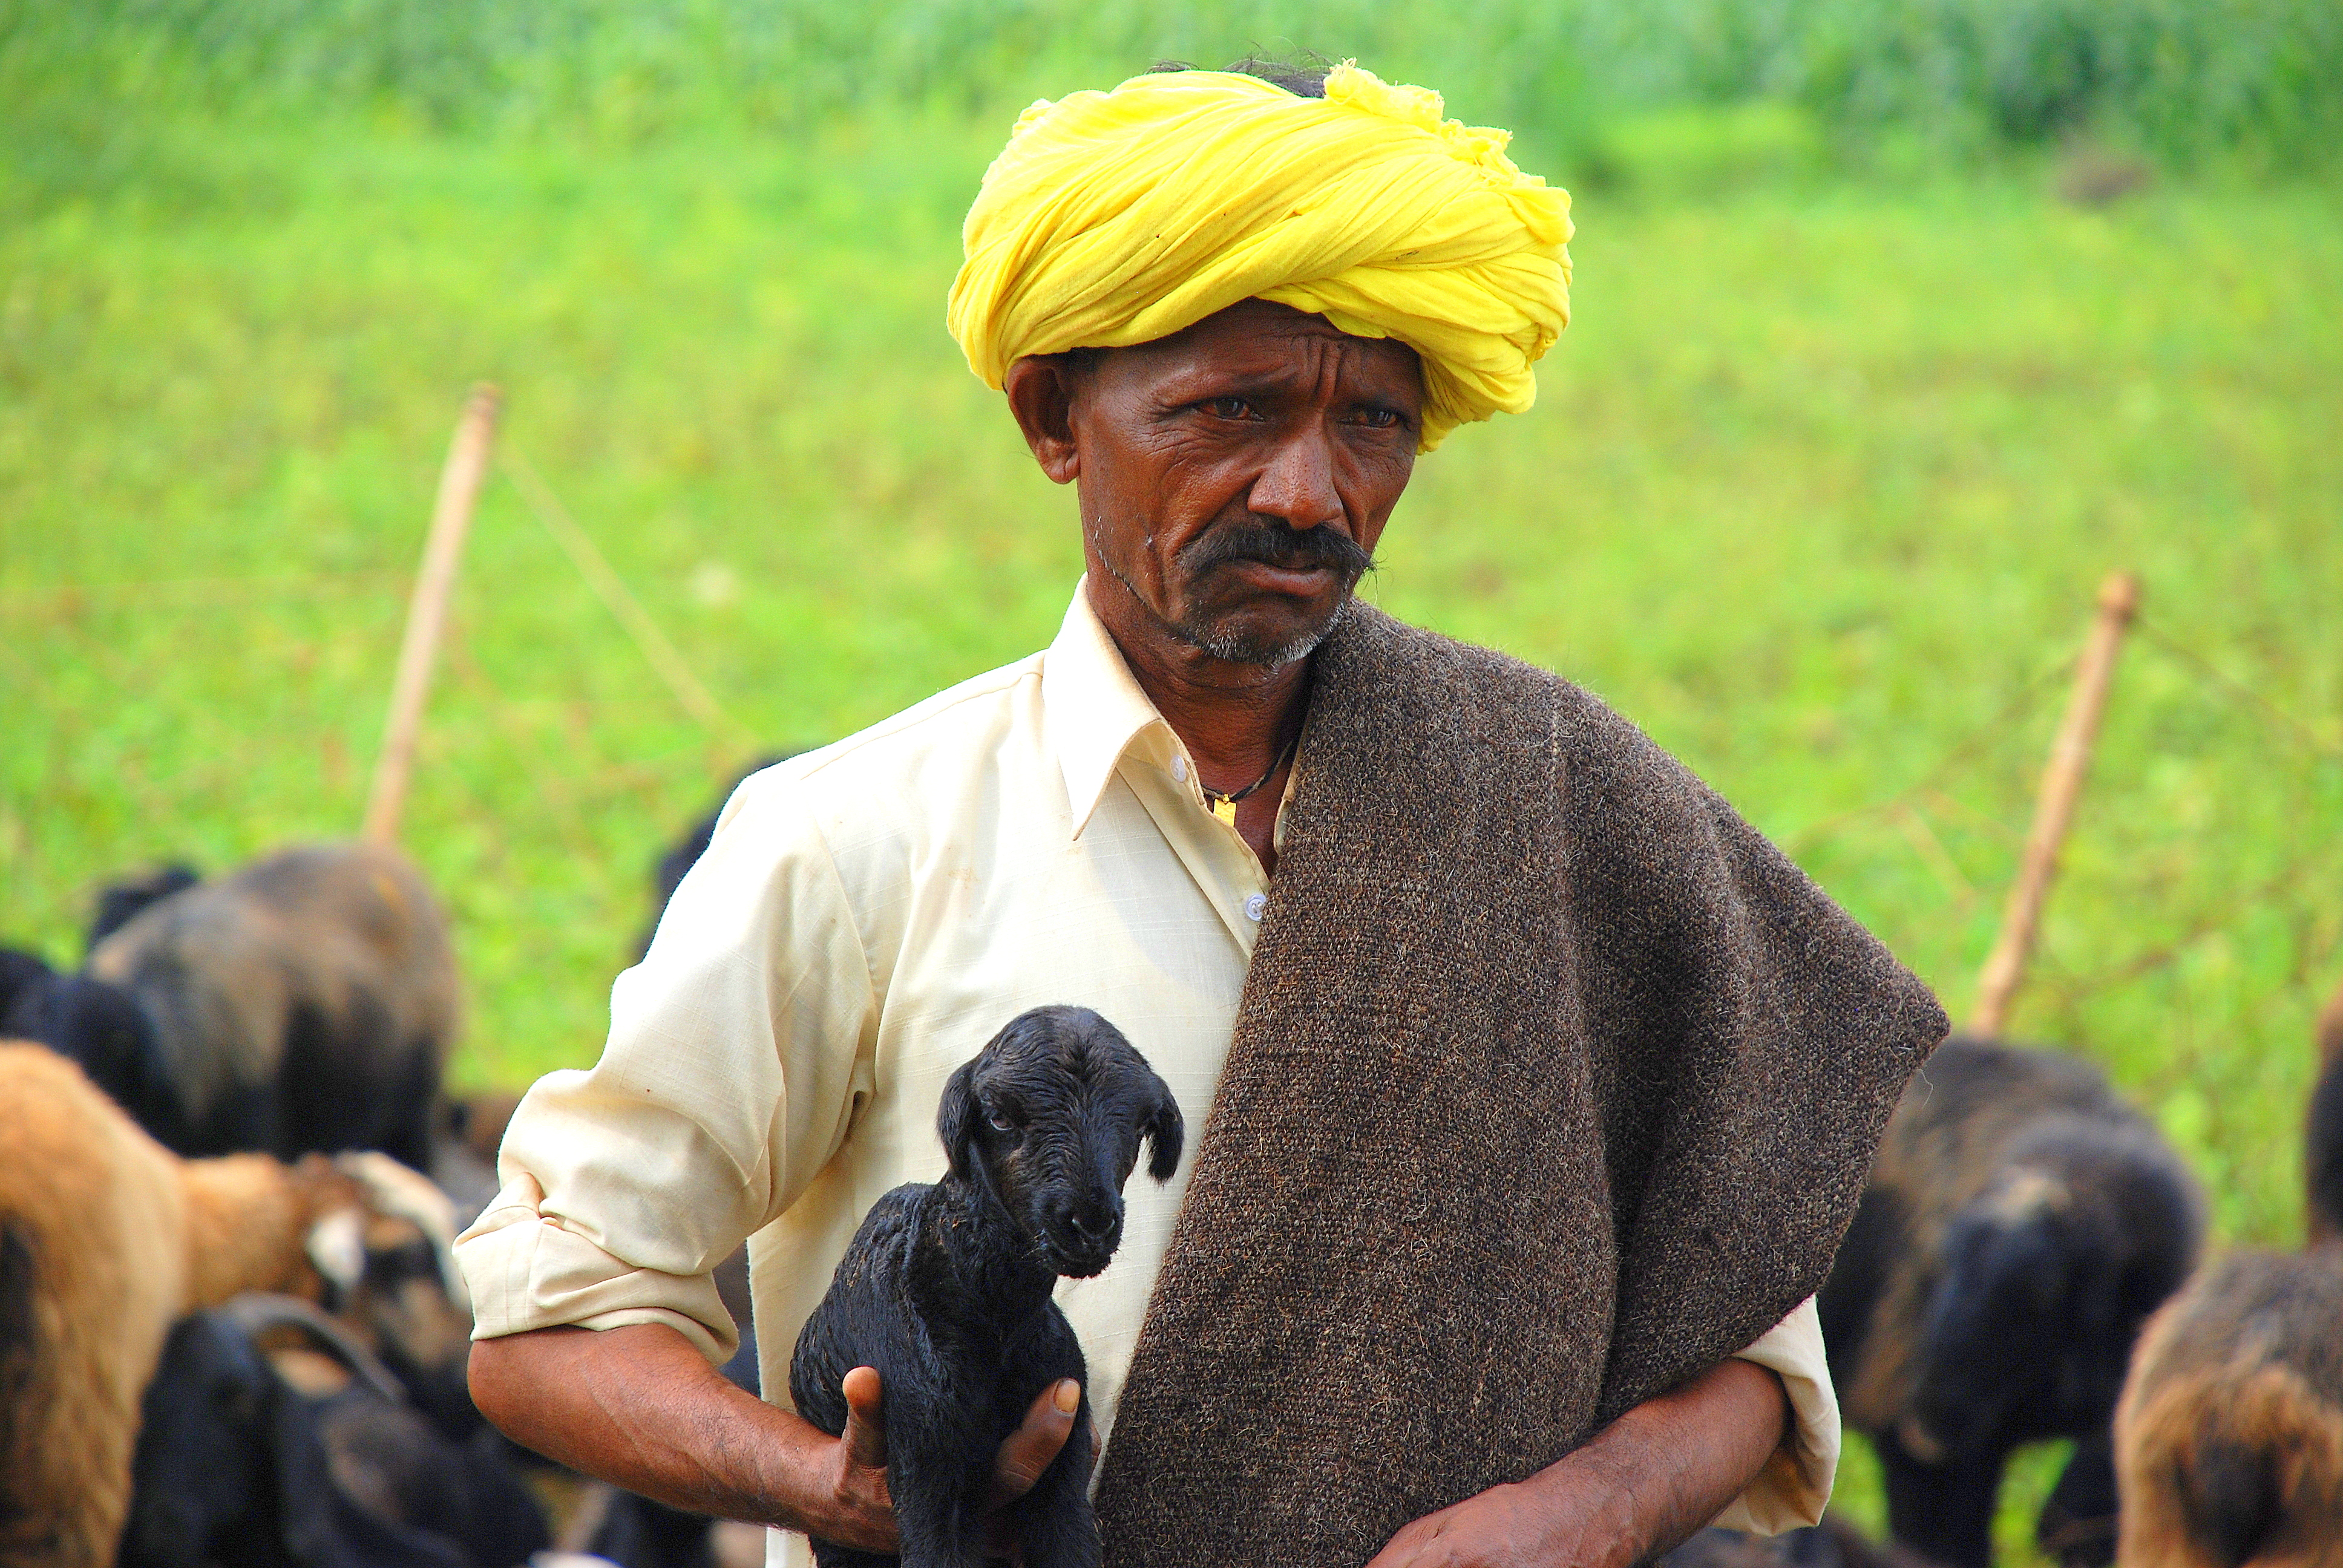 Pastoralists - like this Kuruba shepherd from India - know how to combine food production and care for the environment. We should learn from them! And support their "Livestock Keepers' Rights"